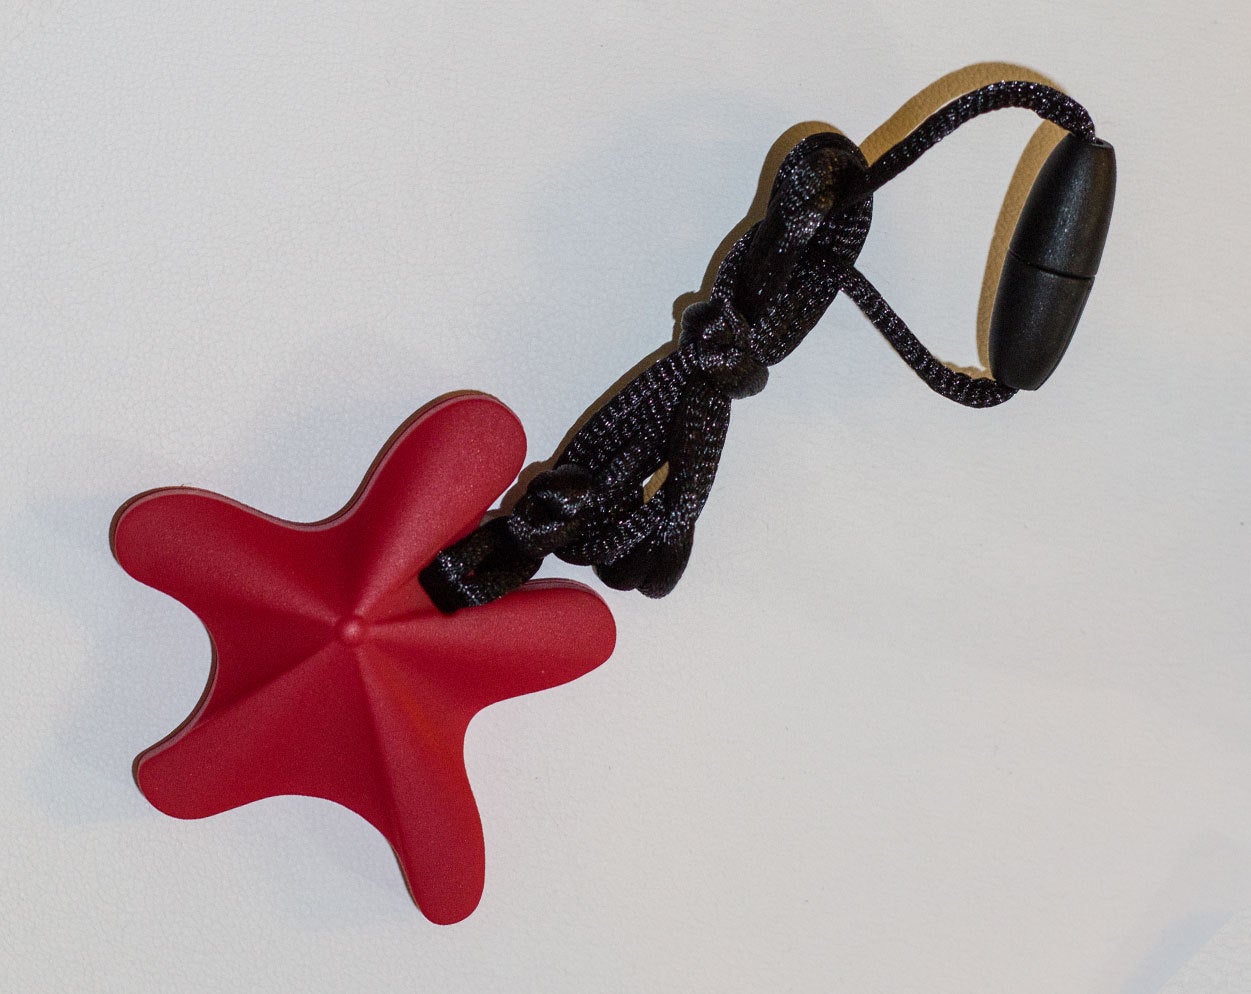 1 Silicone Starfish Teether / Pendant in Red - Silicone Teething, Silicone Teether, Teething Pendant